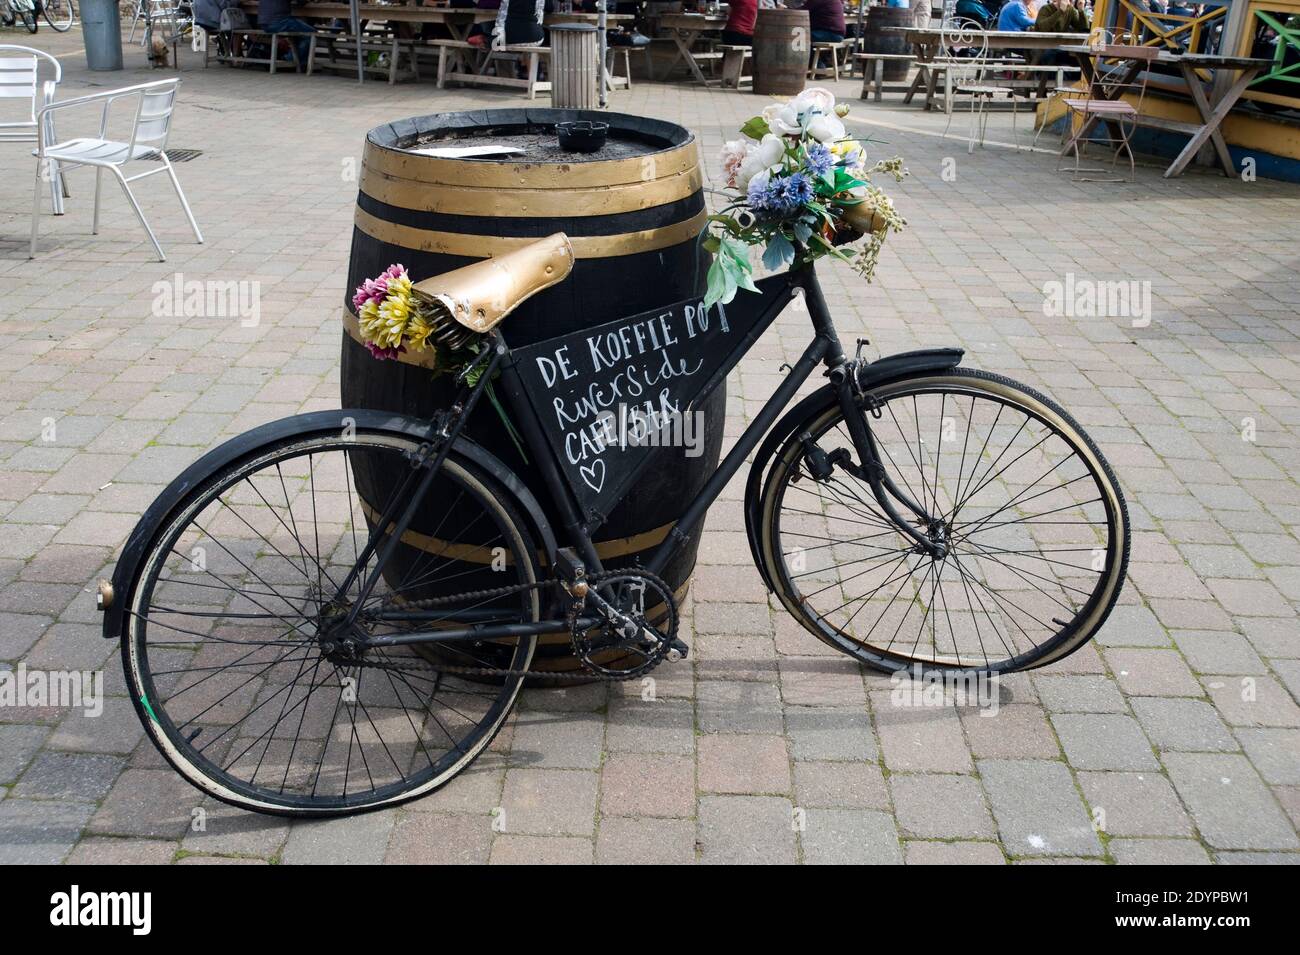 Barrel & Bicycle Advertising De Koffie Pot Riverside Cafe & Bar On The Left Bank In The City Of Hereford Herefordshire England UK Stock Photo